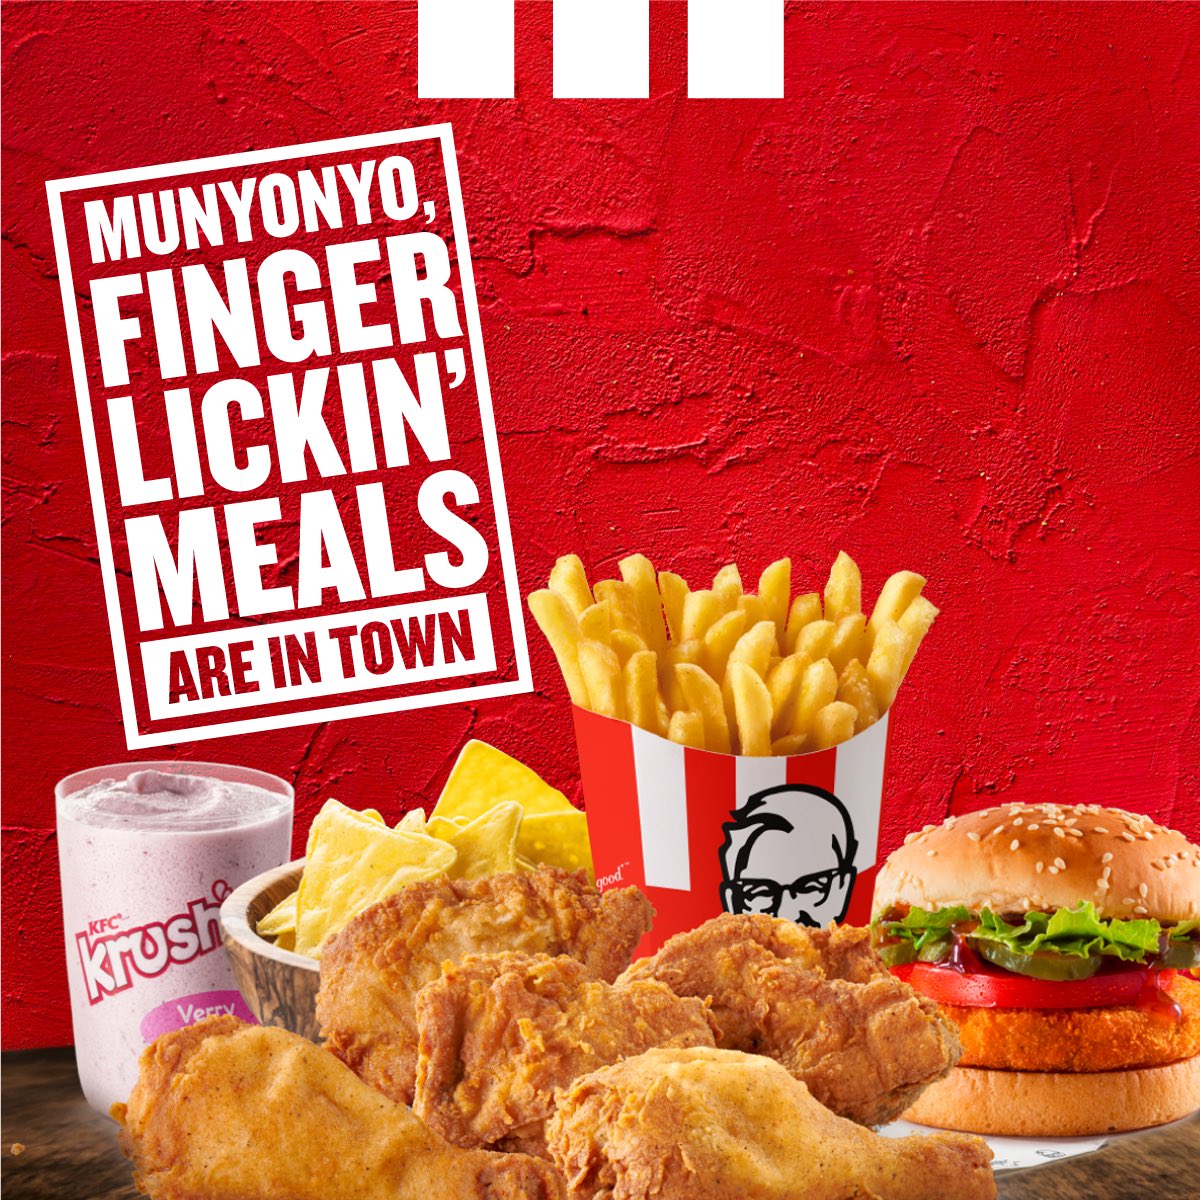 Give your kitchen a well- deserved break this weekend and treat your family to a delicious meal. Drive -thru, Dine in or even Take Away. #ItsFingerLickinGood